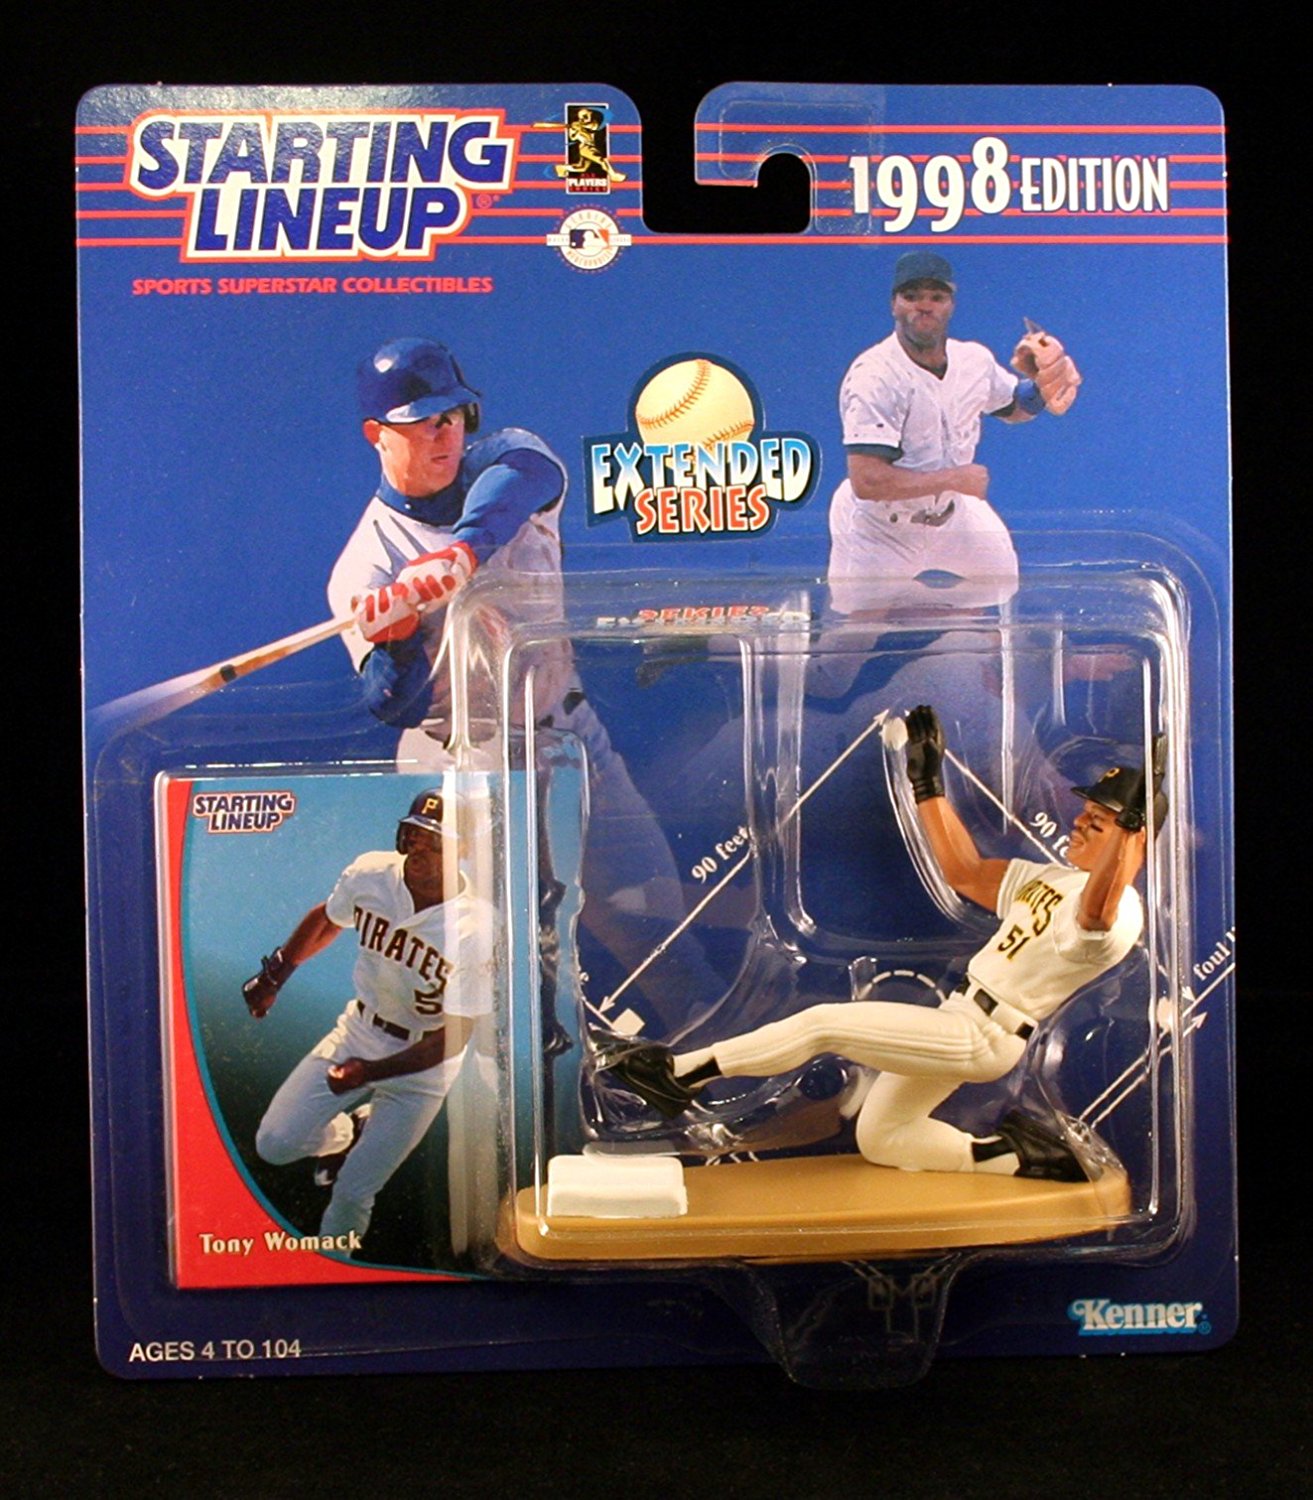 TONY WOMACK / PITTSBURGH PIRATES 1998 MLB Extended Series Starting Lineup Action Figure & Exclusive Collector Trading Card